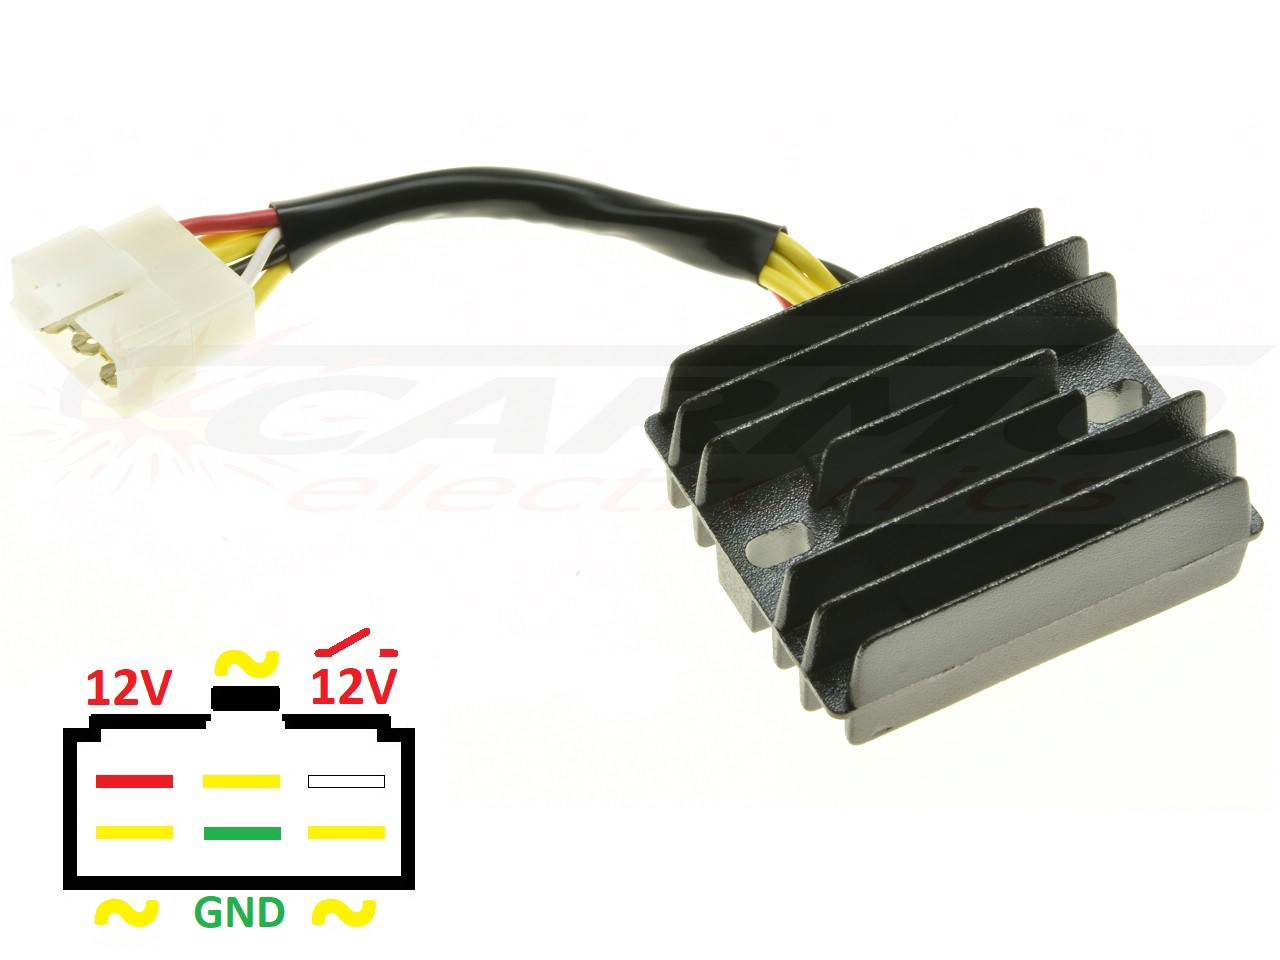 CARR201-YY - MOSFET Benzhou Quantum YY125 YY 125 Voltage regulator rectifier (LH0909) - Click Image to Close